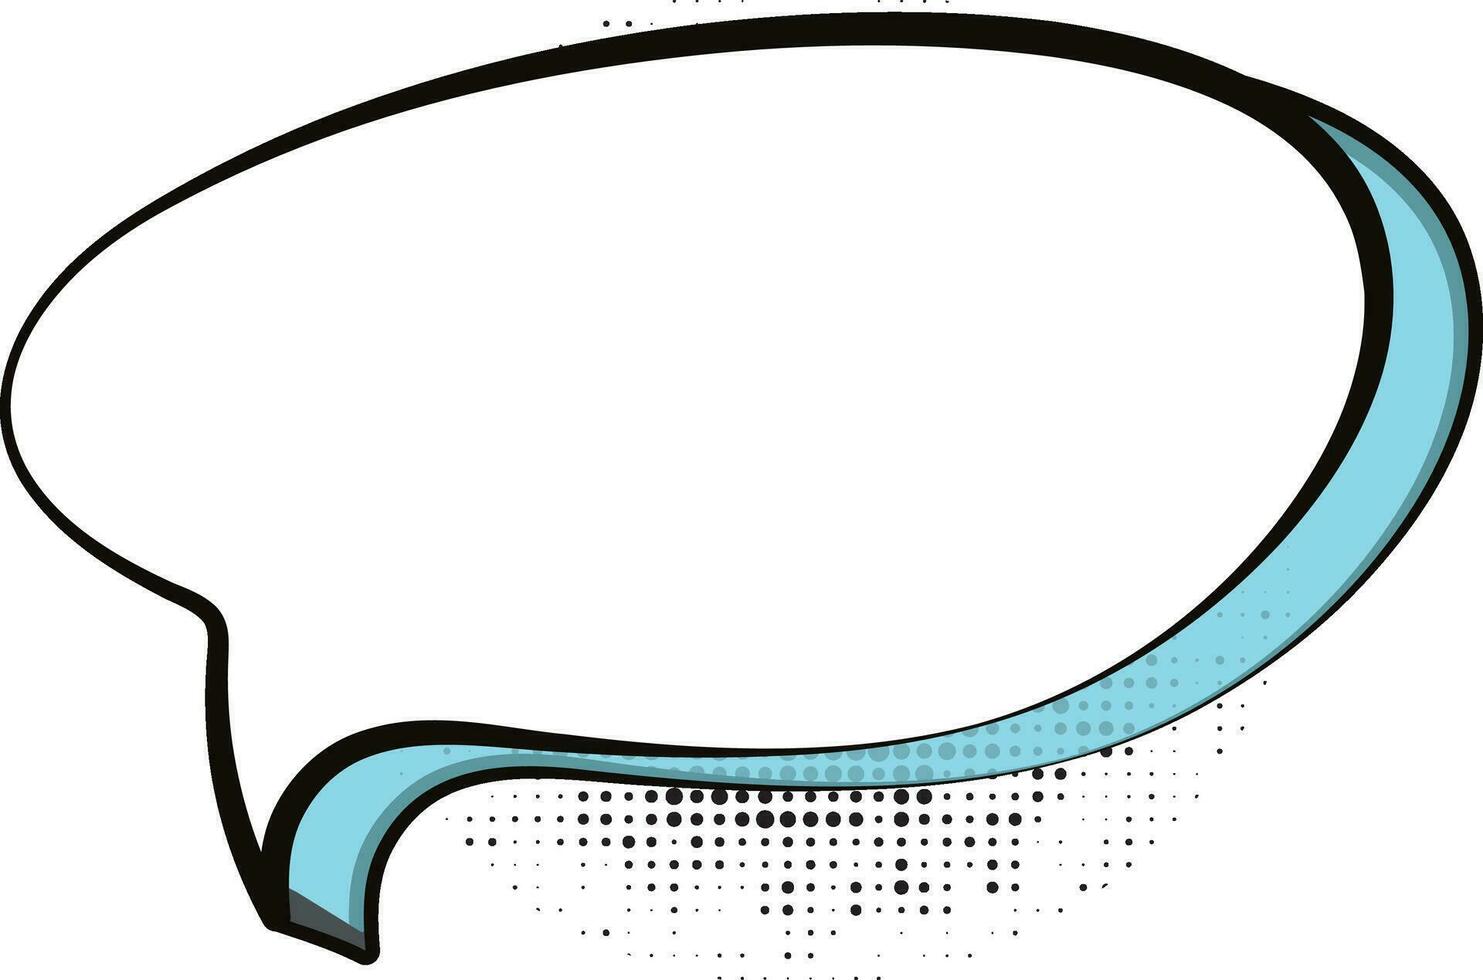 Speech bubble in white and blue color. vector